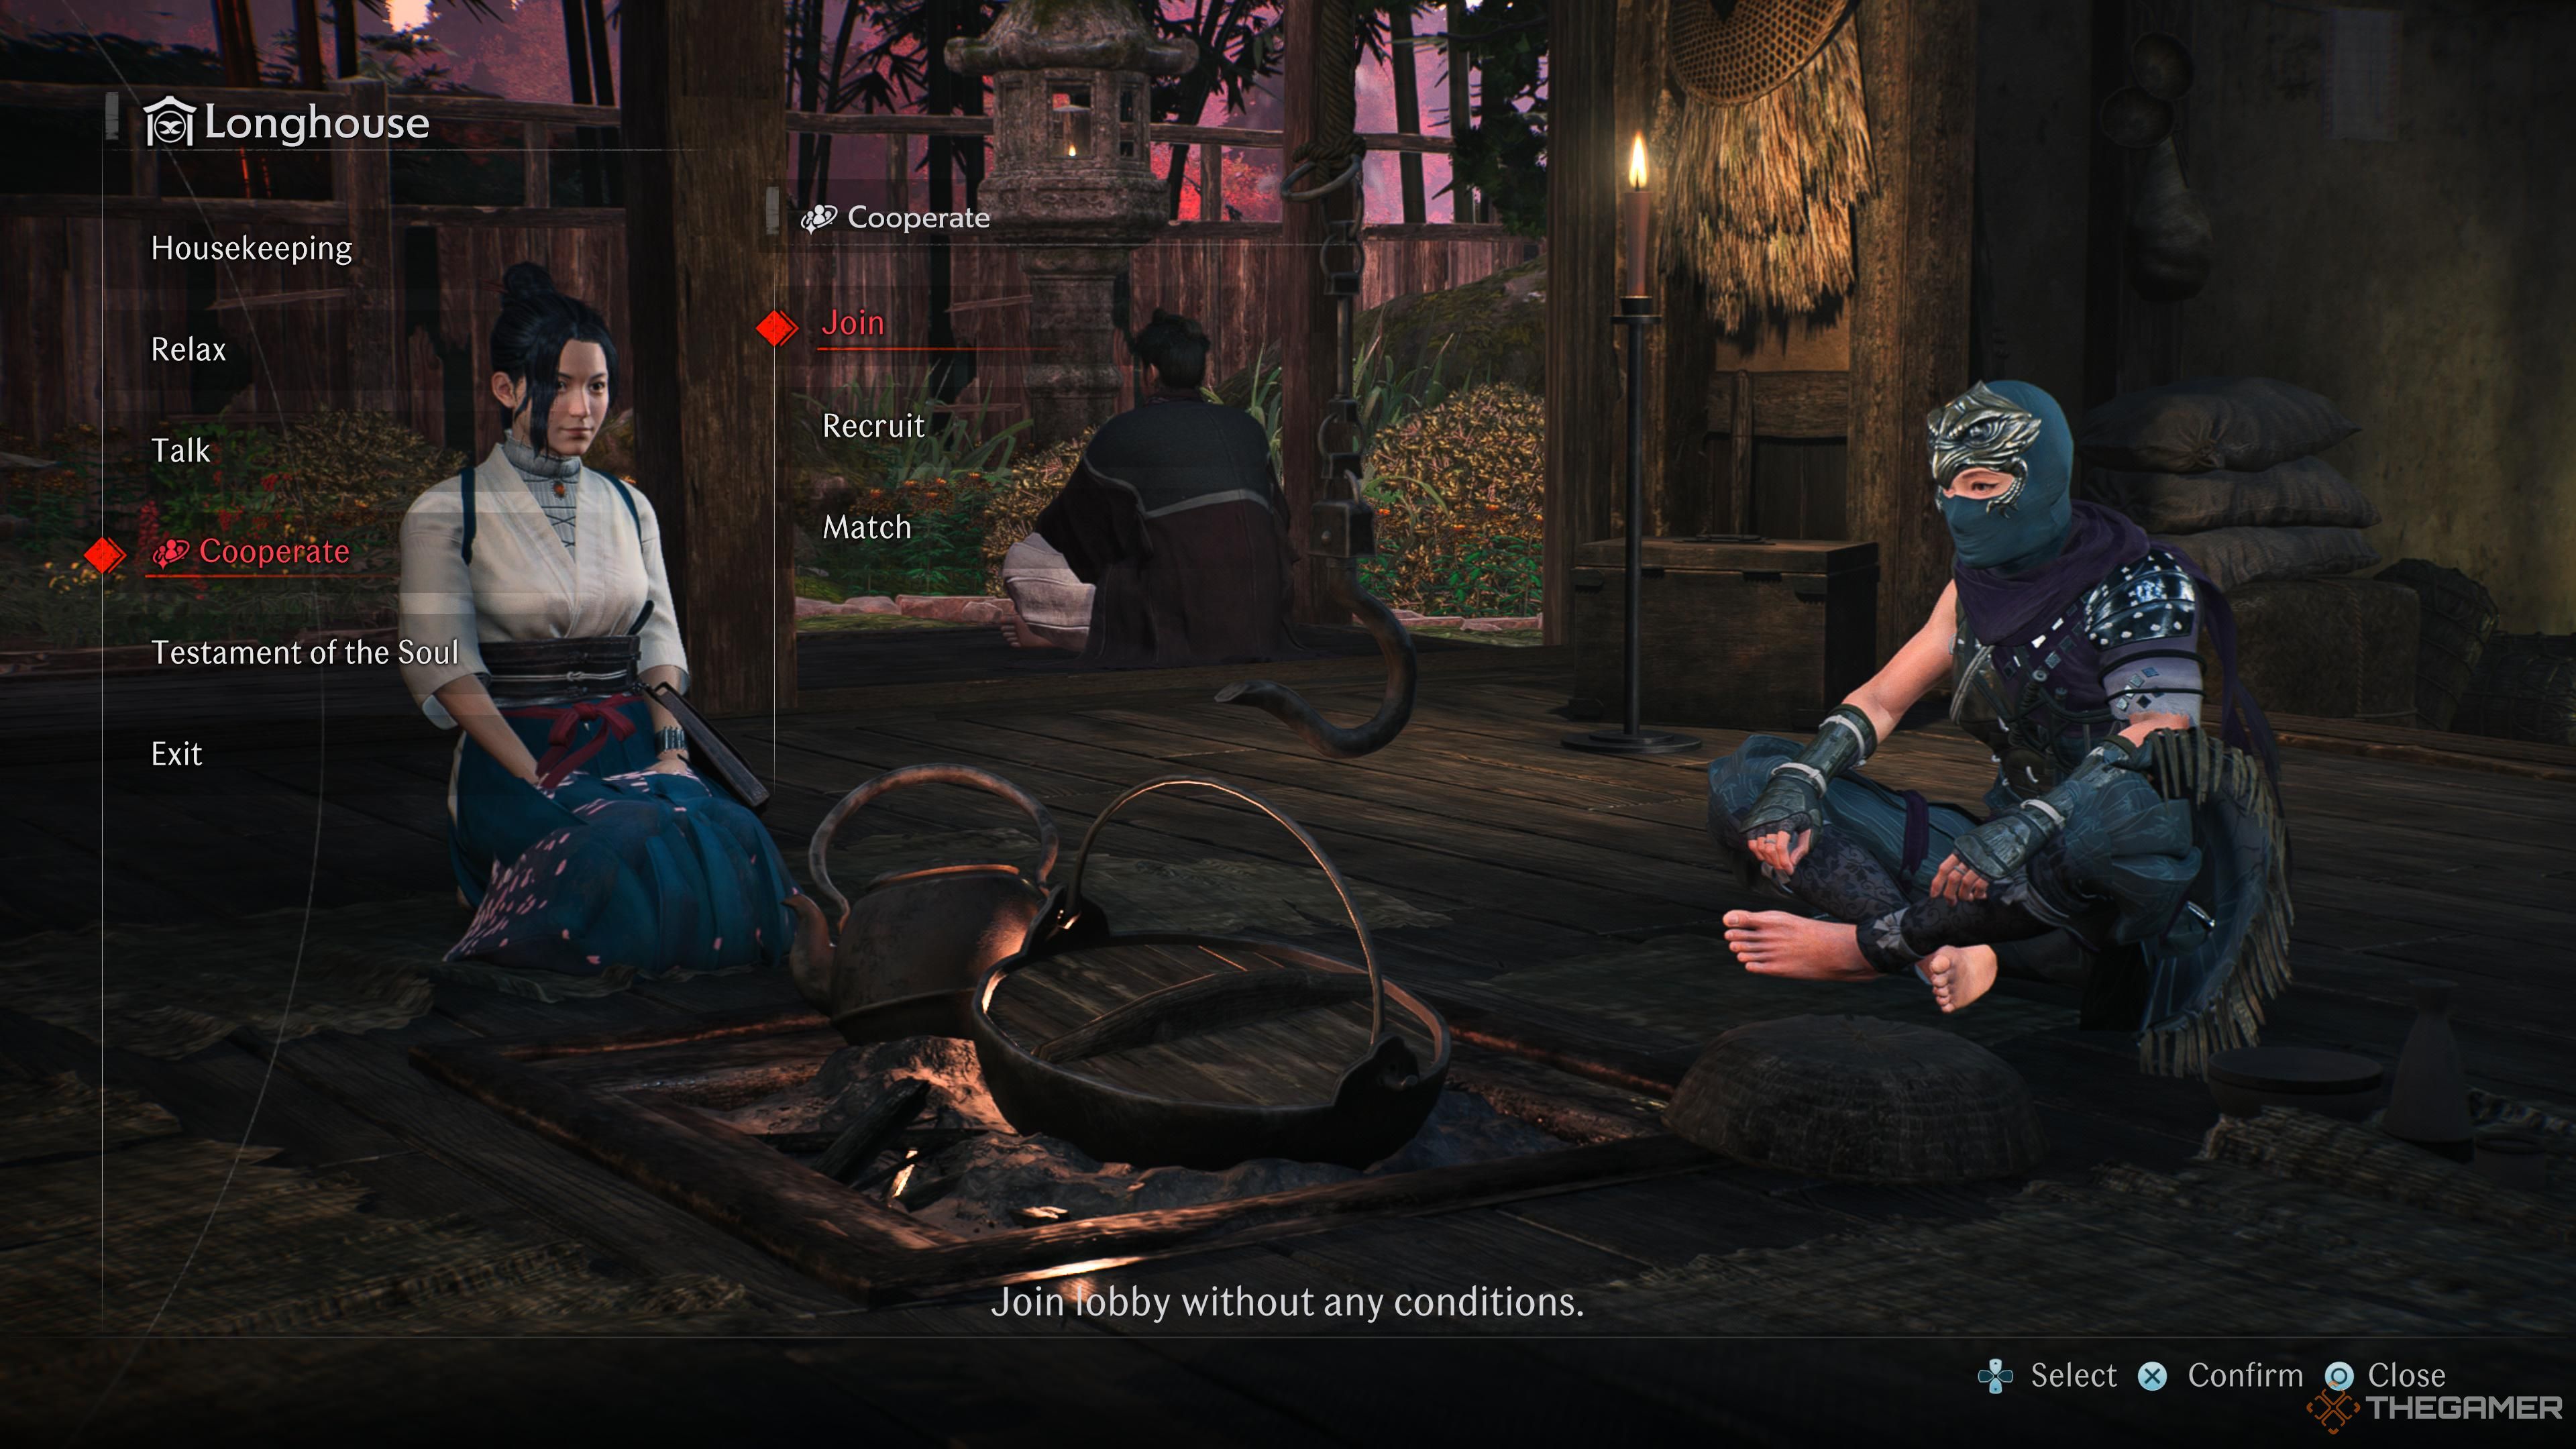 Cooperate menu in the longhouse in Rise of the Ronin